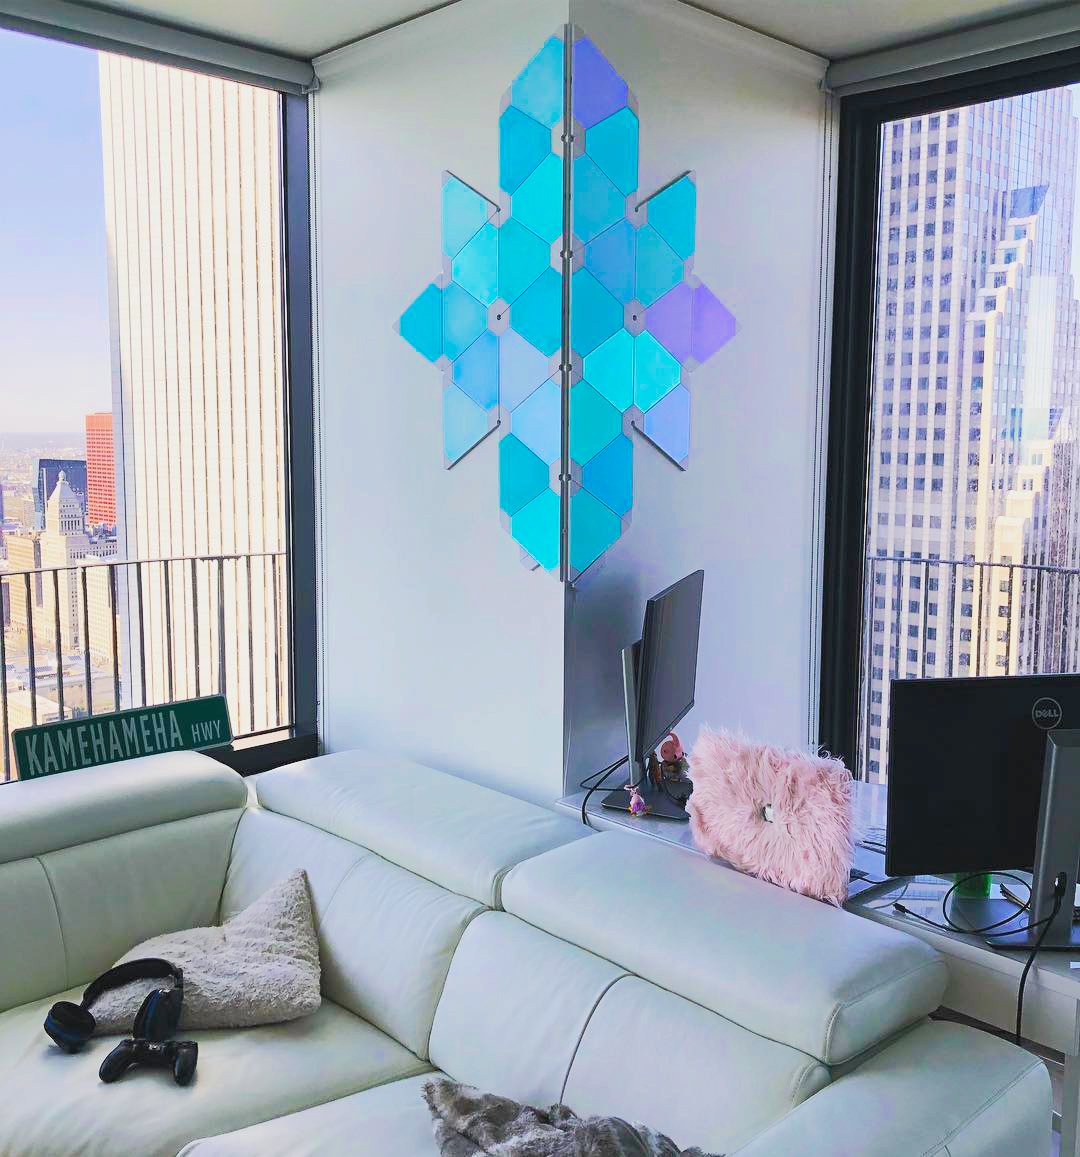 Nanoleaf on Twitter: a view! Oh, and what's out the window looks pretty cool too. @_gabreakadabra 's setup looks amazing taking on the corner, brings new life to